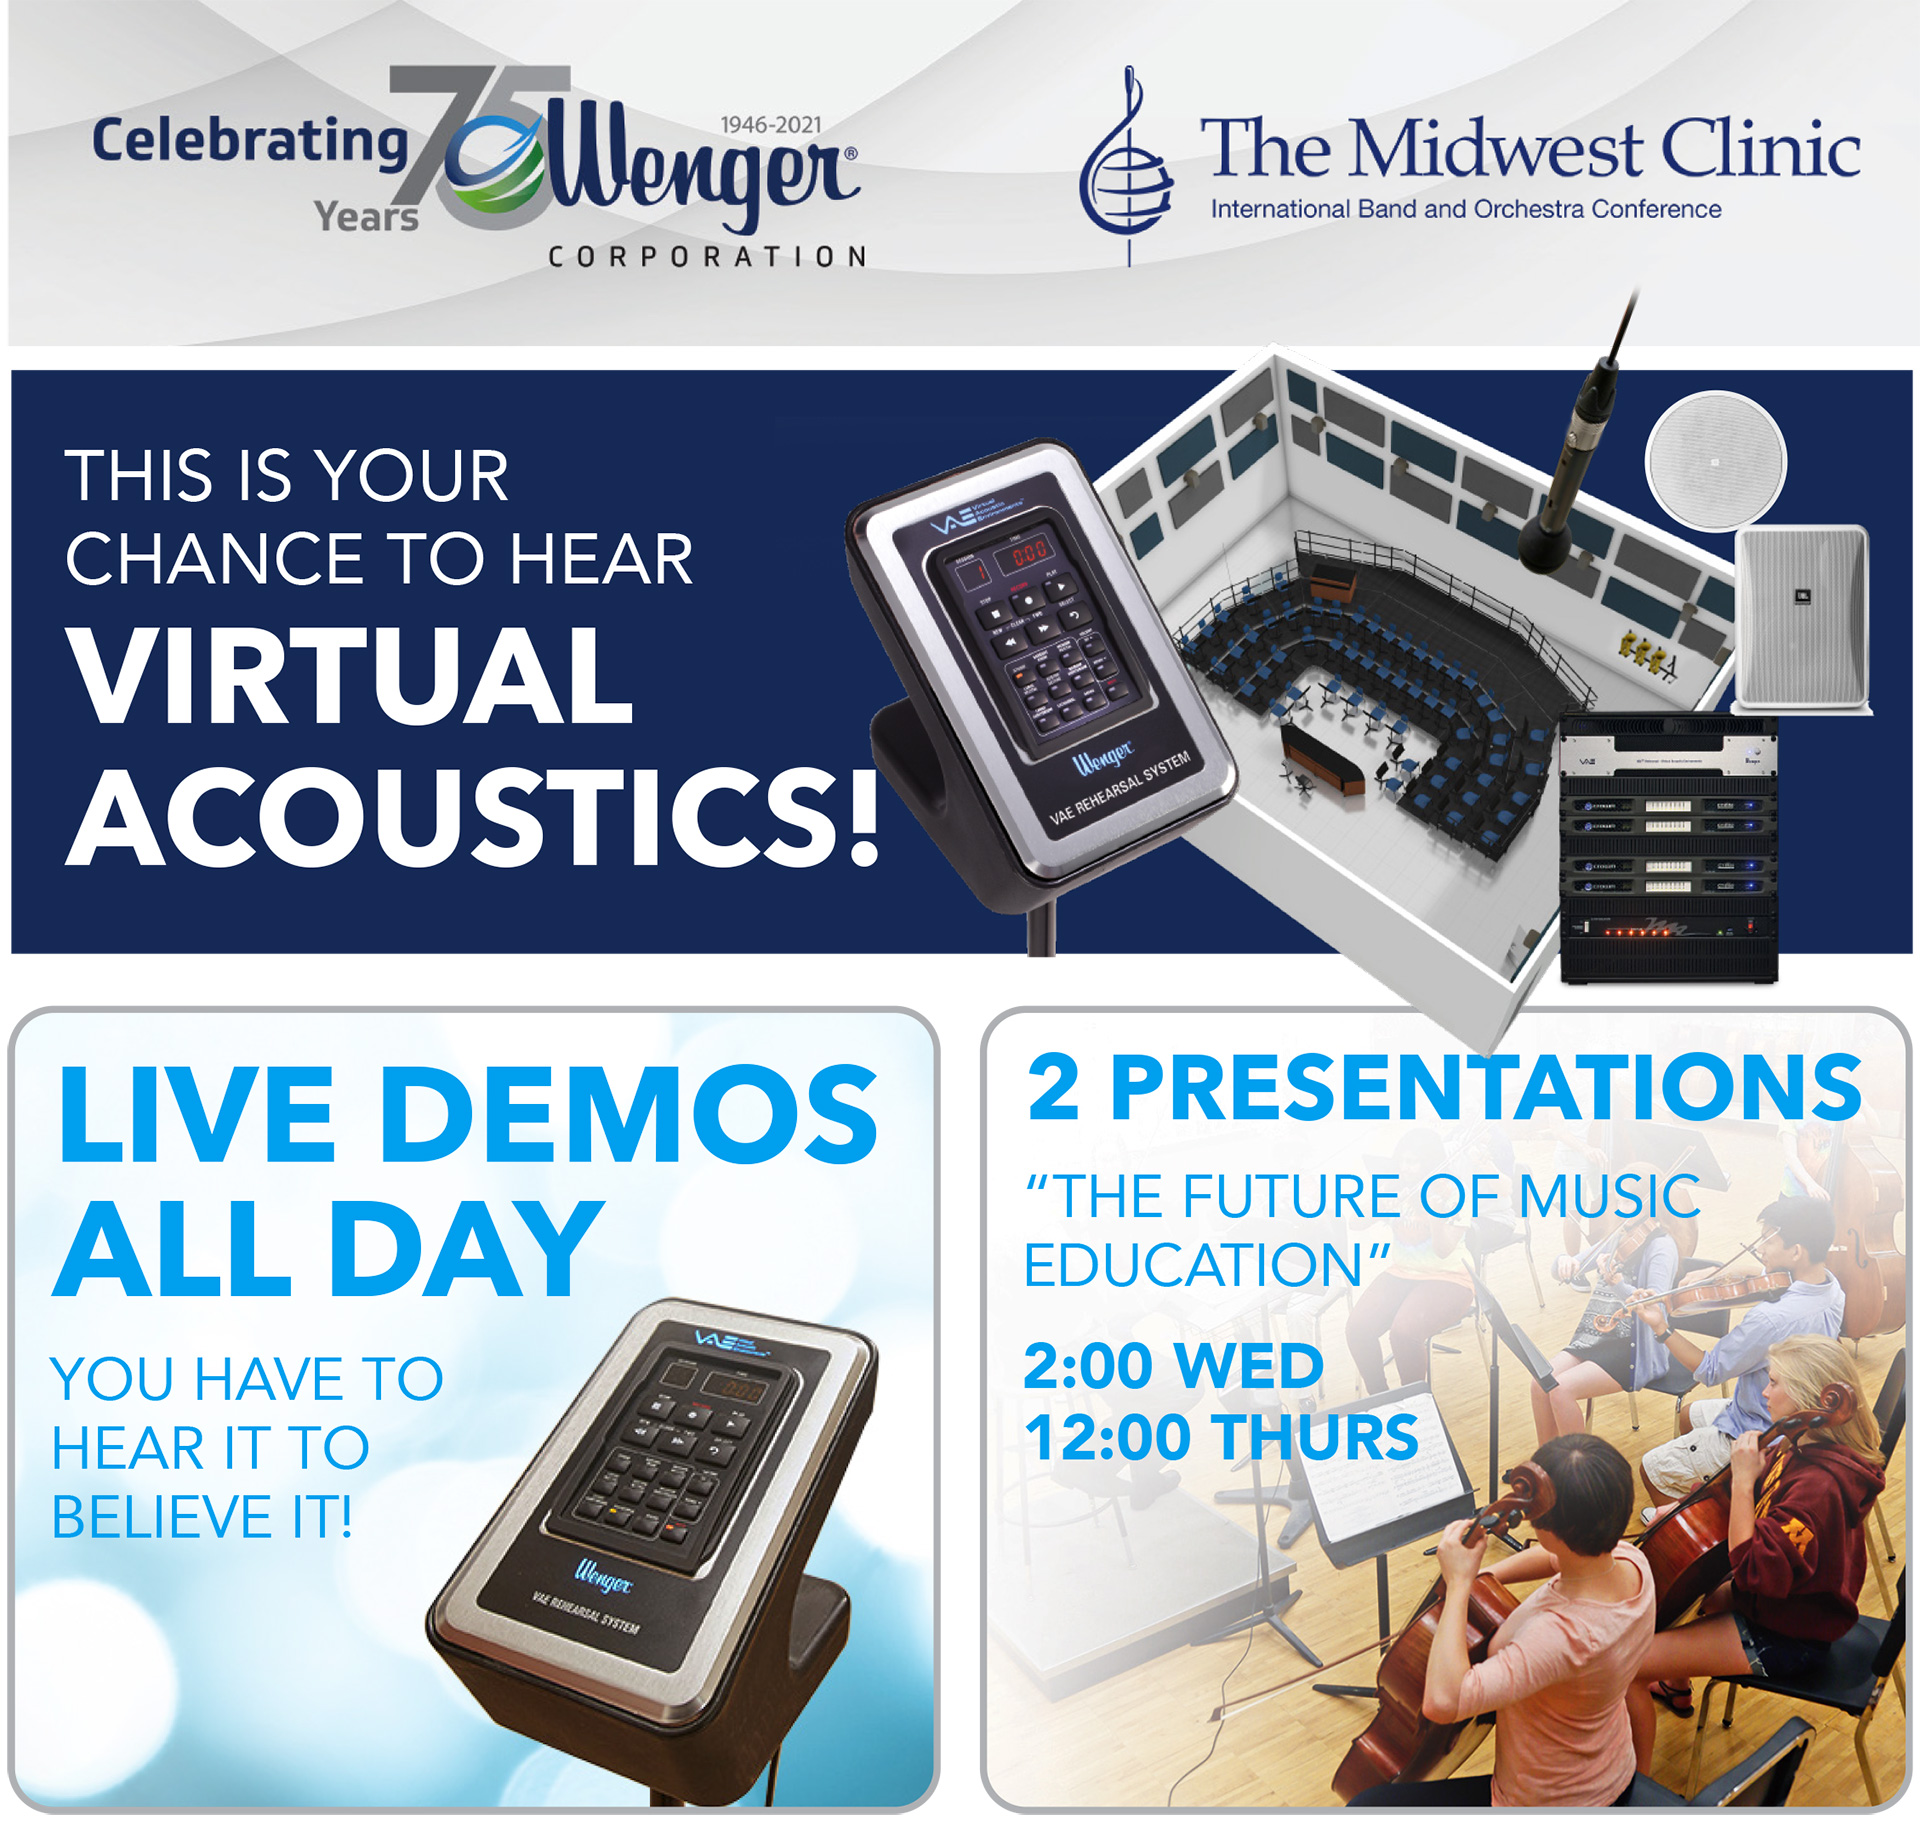 THIS IS YOUR CHANCE TO HEAR VIRTUAL ACOUSTICS!